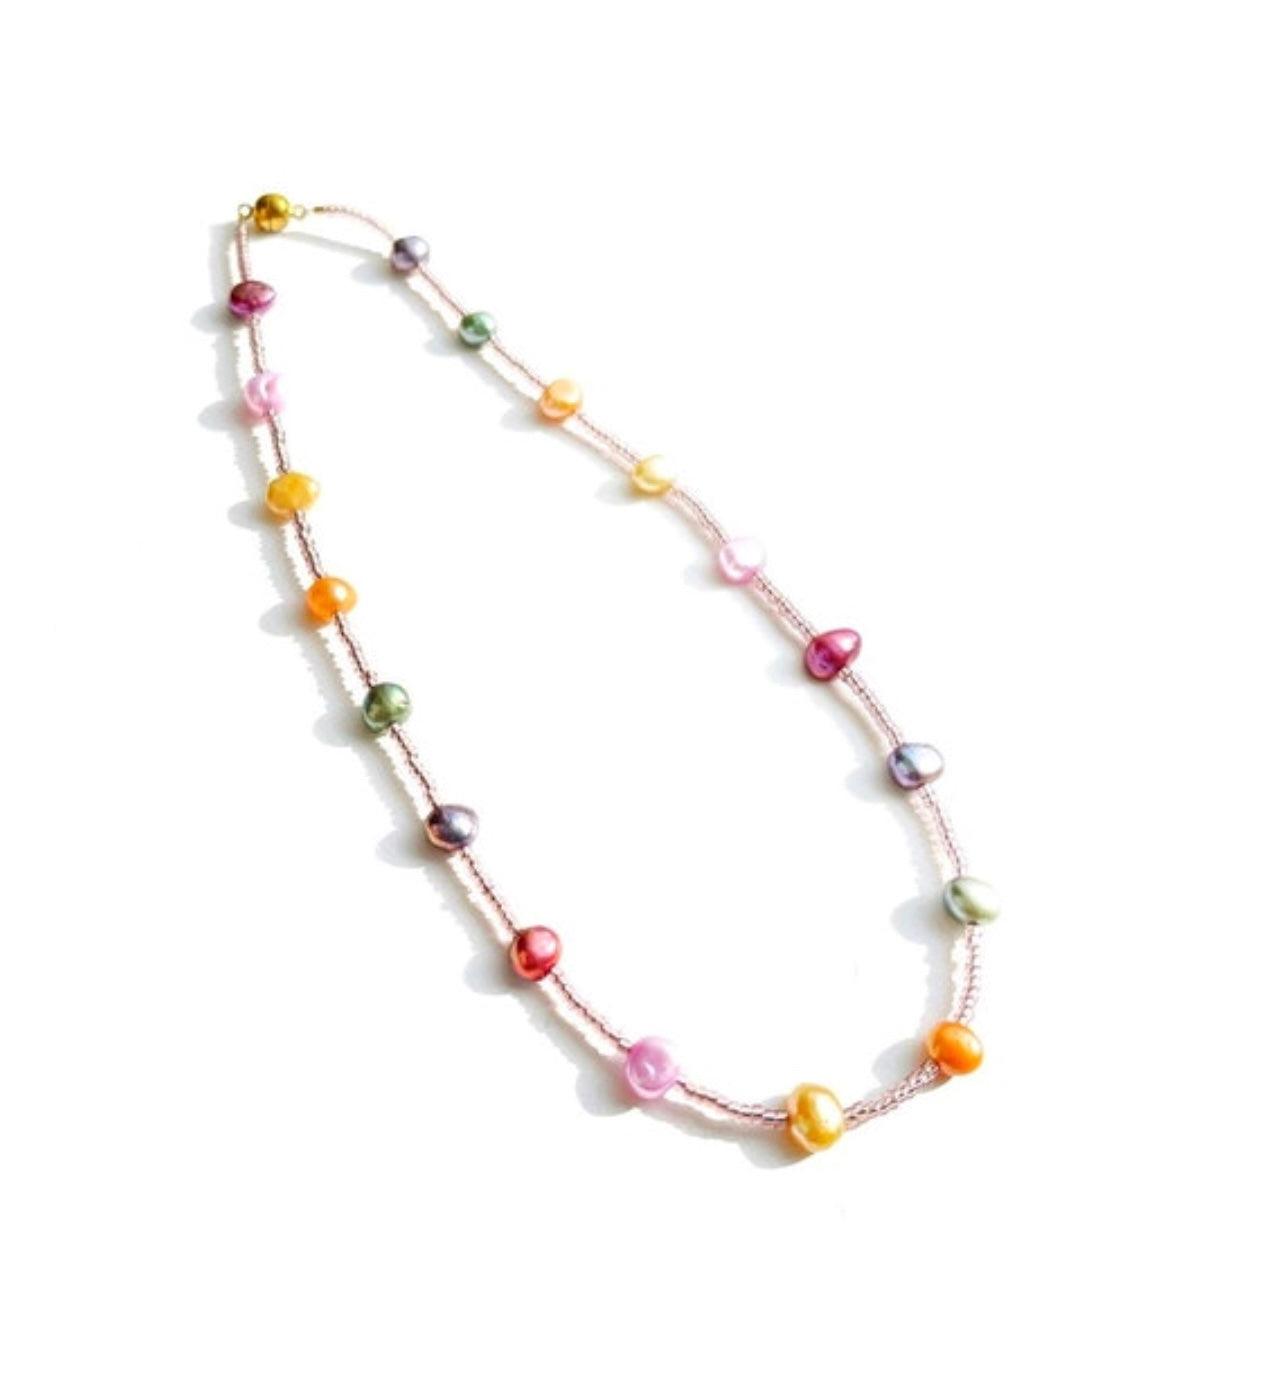 Seed bead choker necklace for summer, dainty pearl necklace choker, colourful unique pearl jewelry